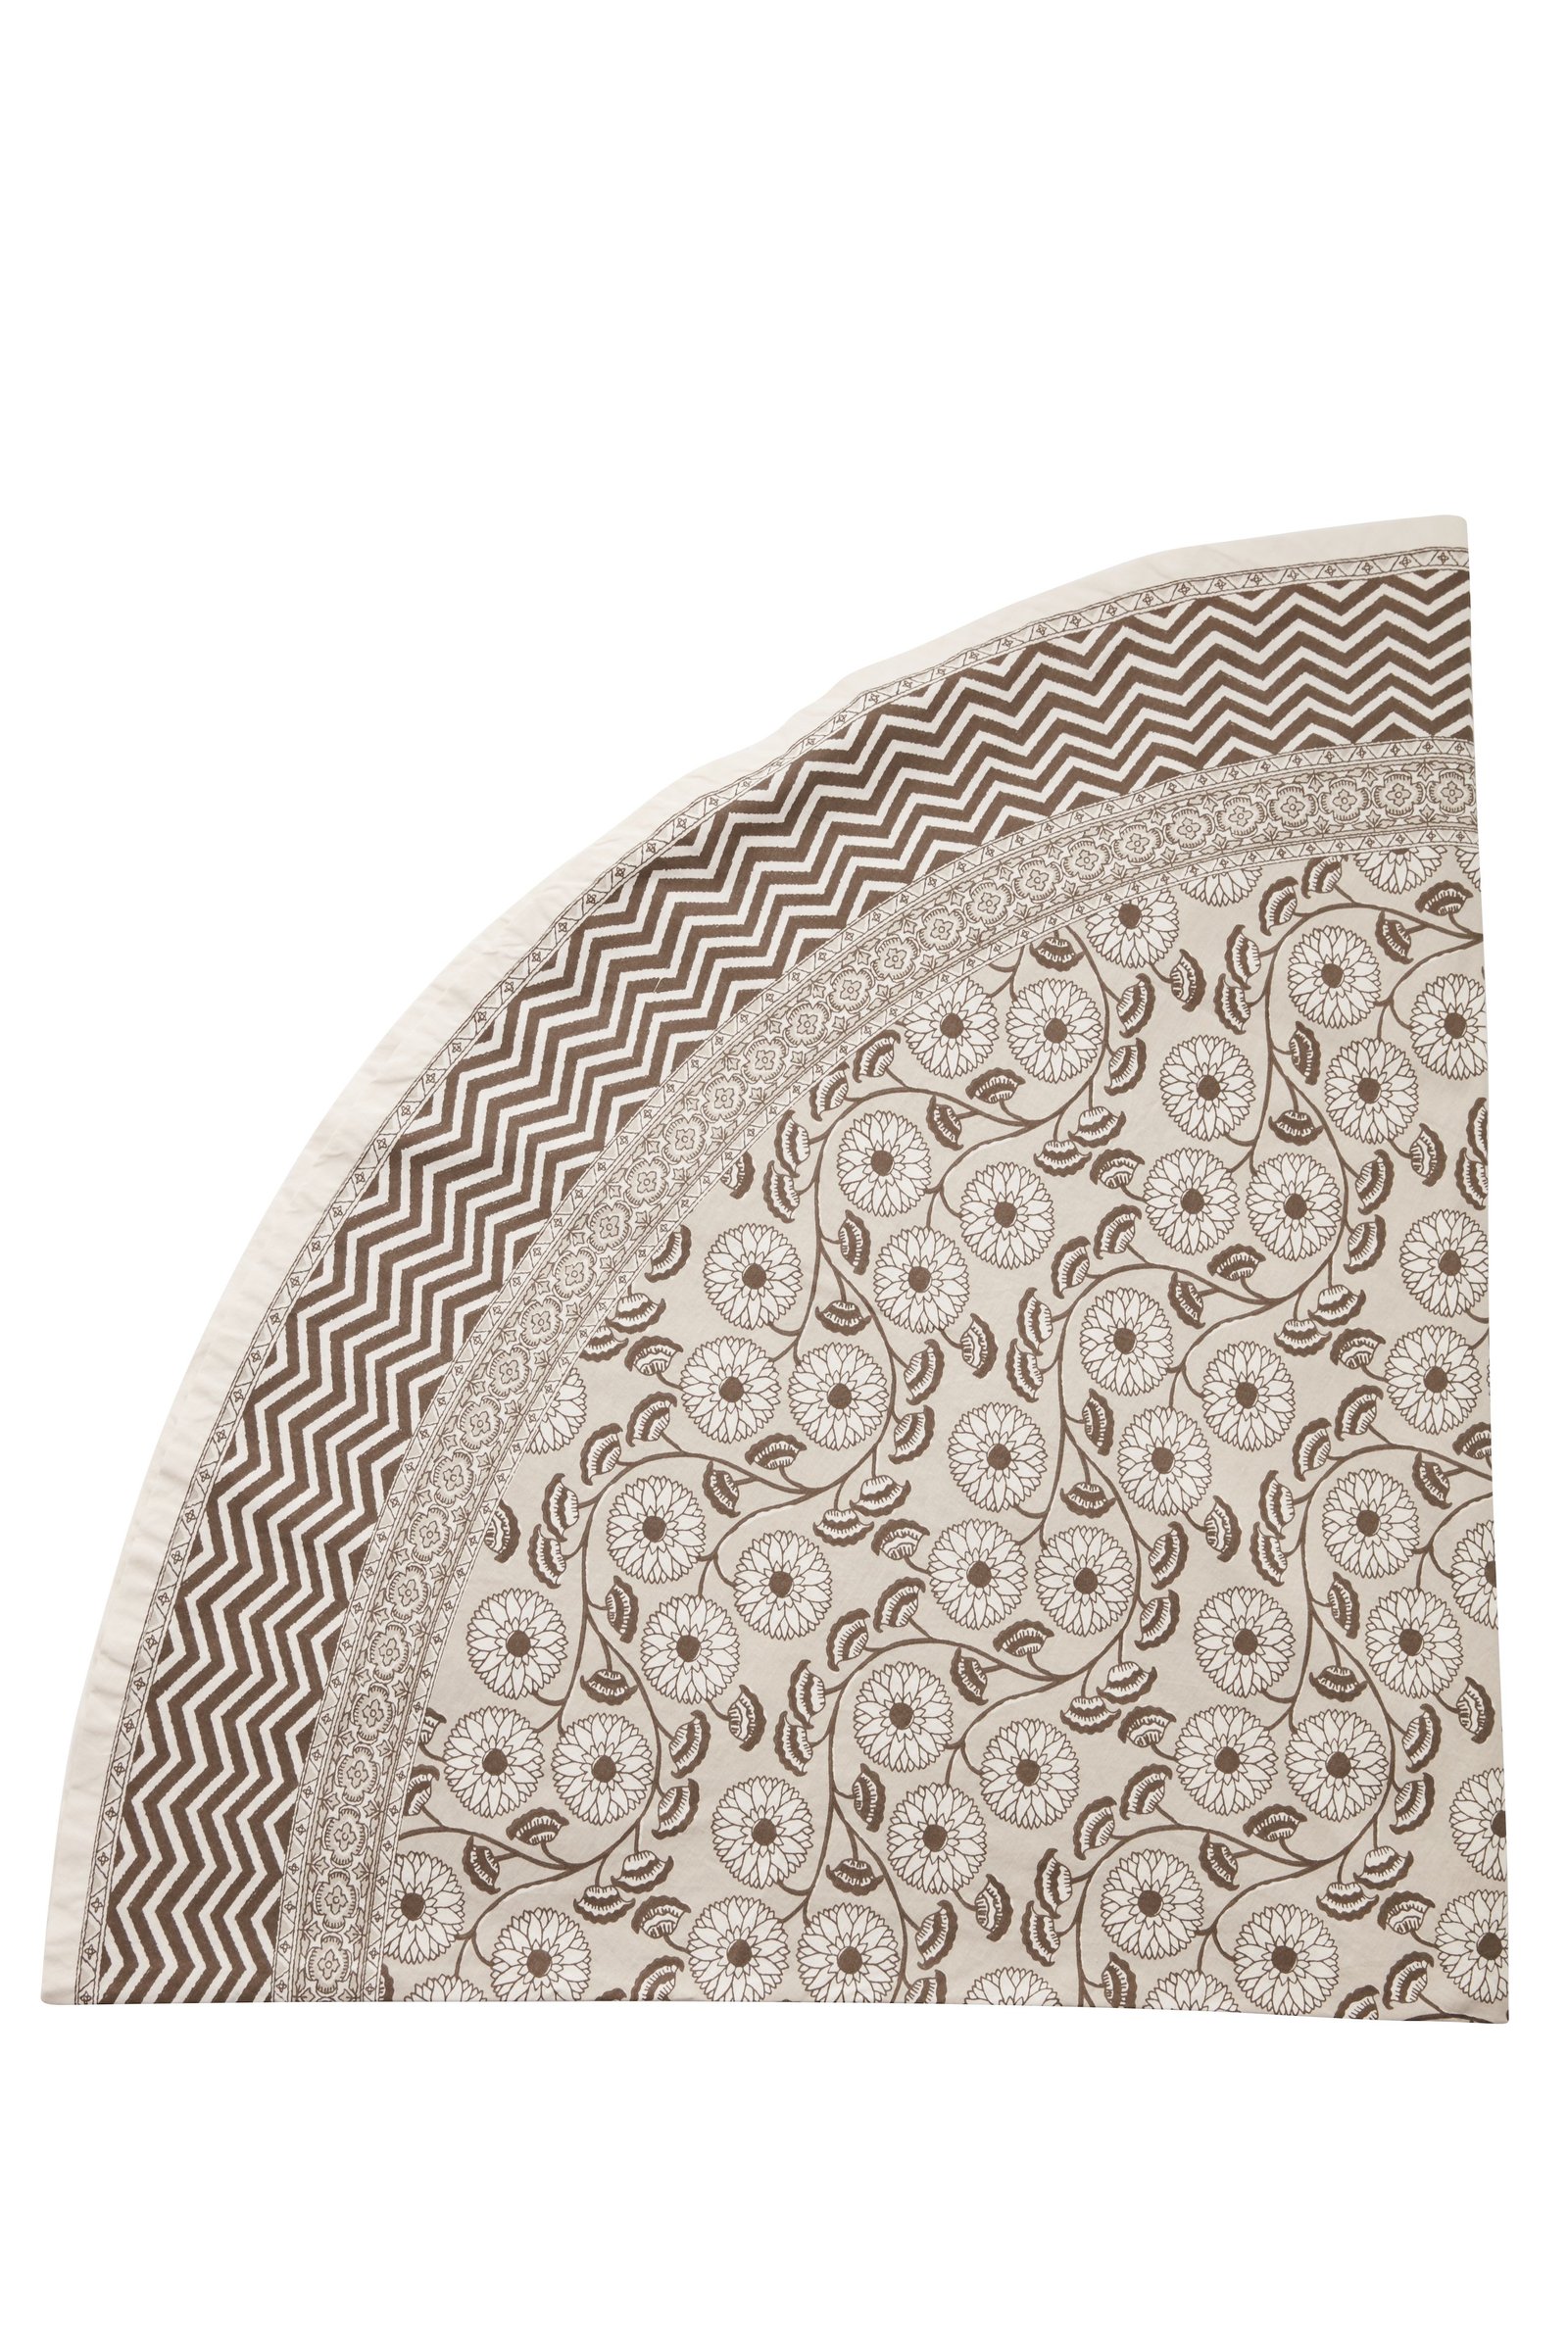 Patterned round tablecloth